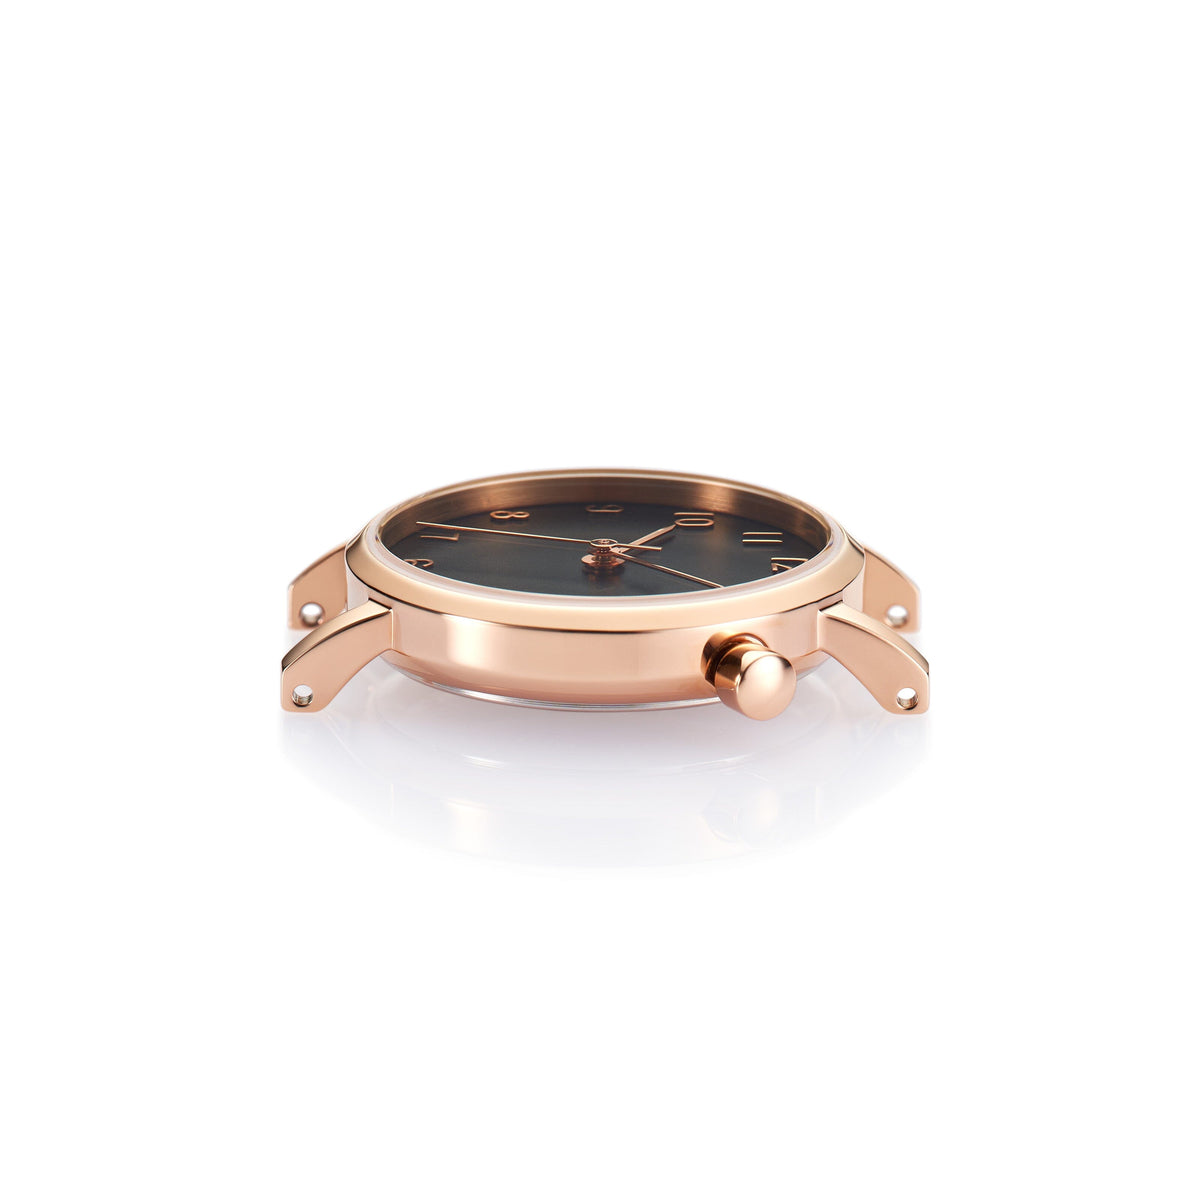 The Black and Rose Gold Watch -  Books (Kids)